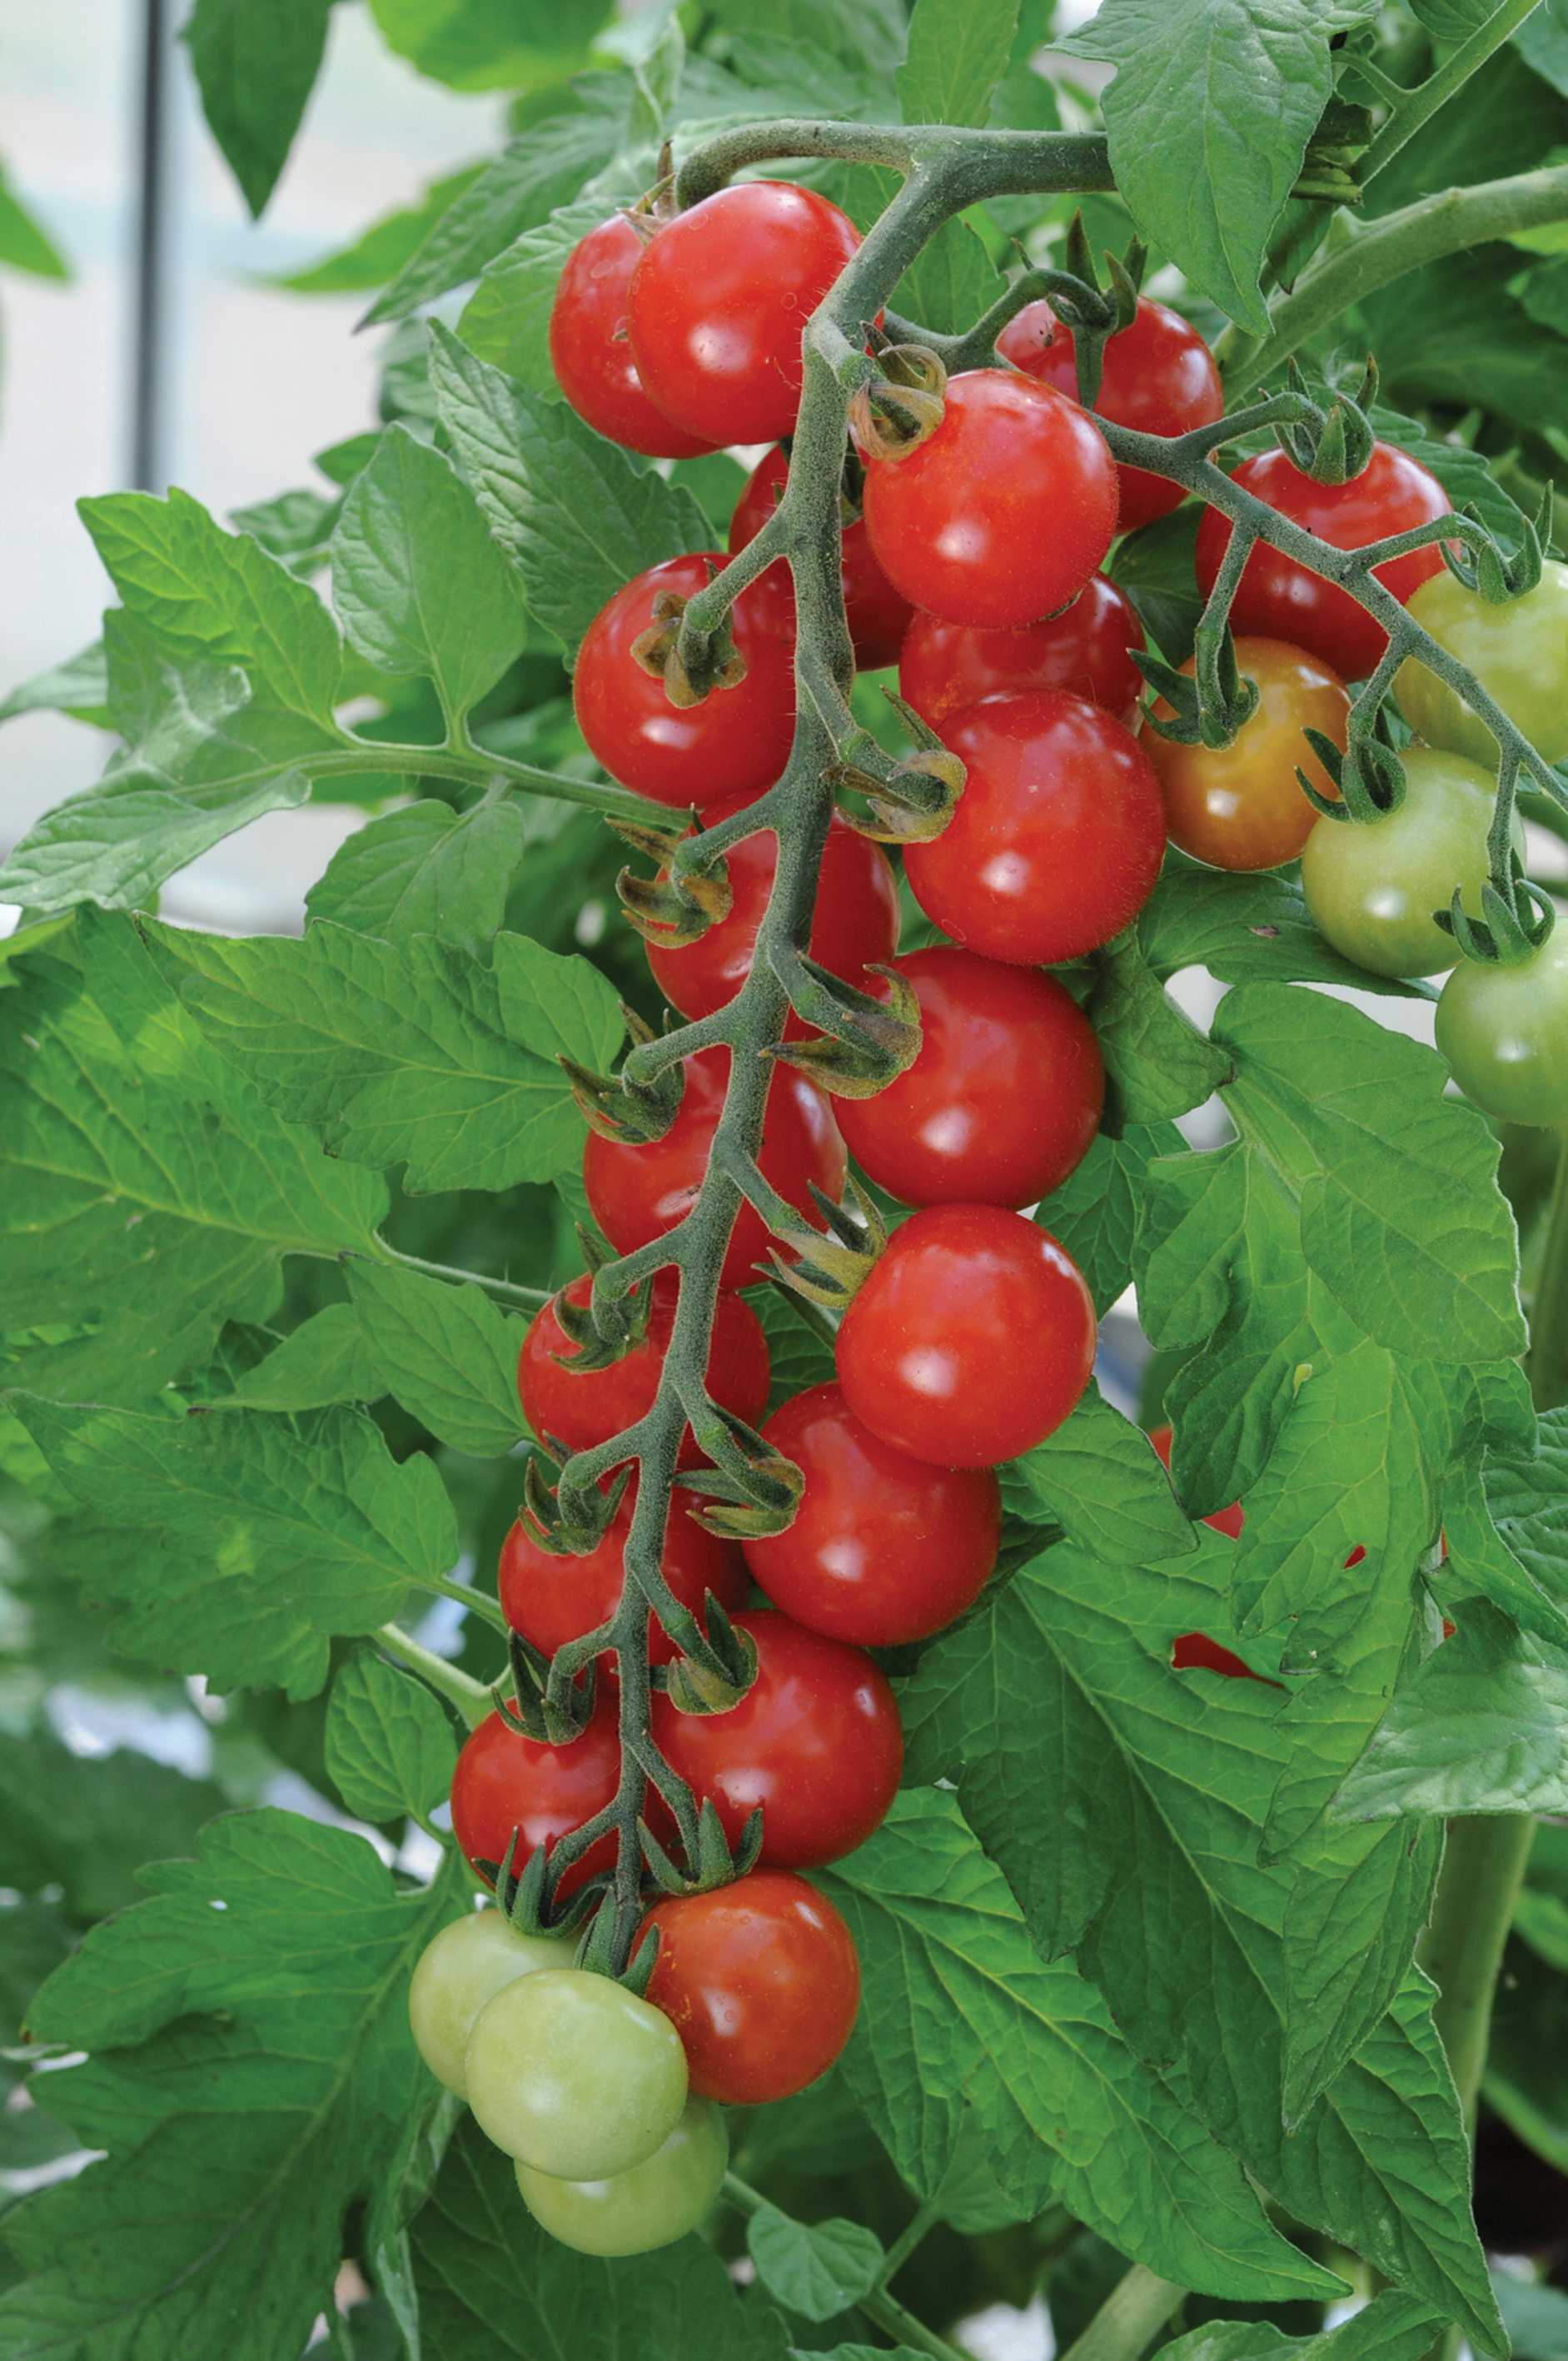 Among the sweetest cherry tomatoes is 'Sweet Aperitif' (Thompson & Morgan/PA)